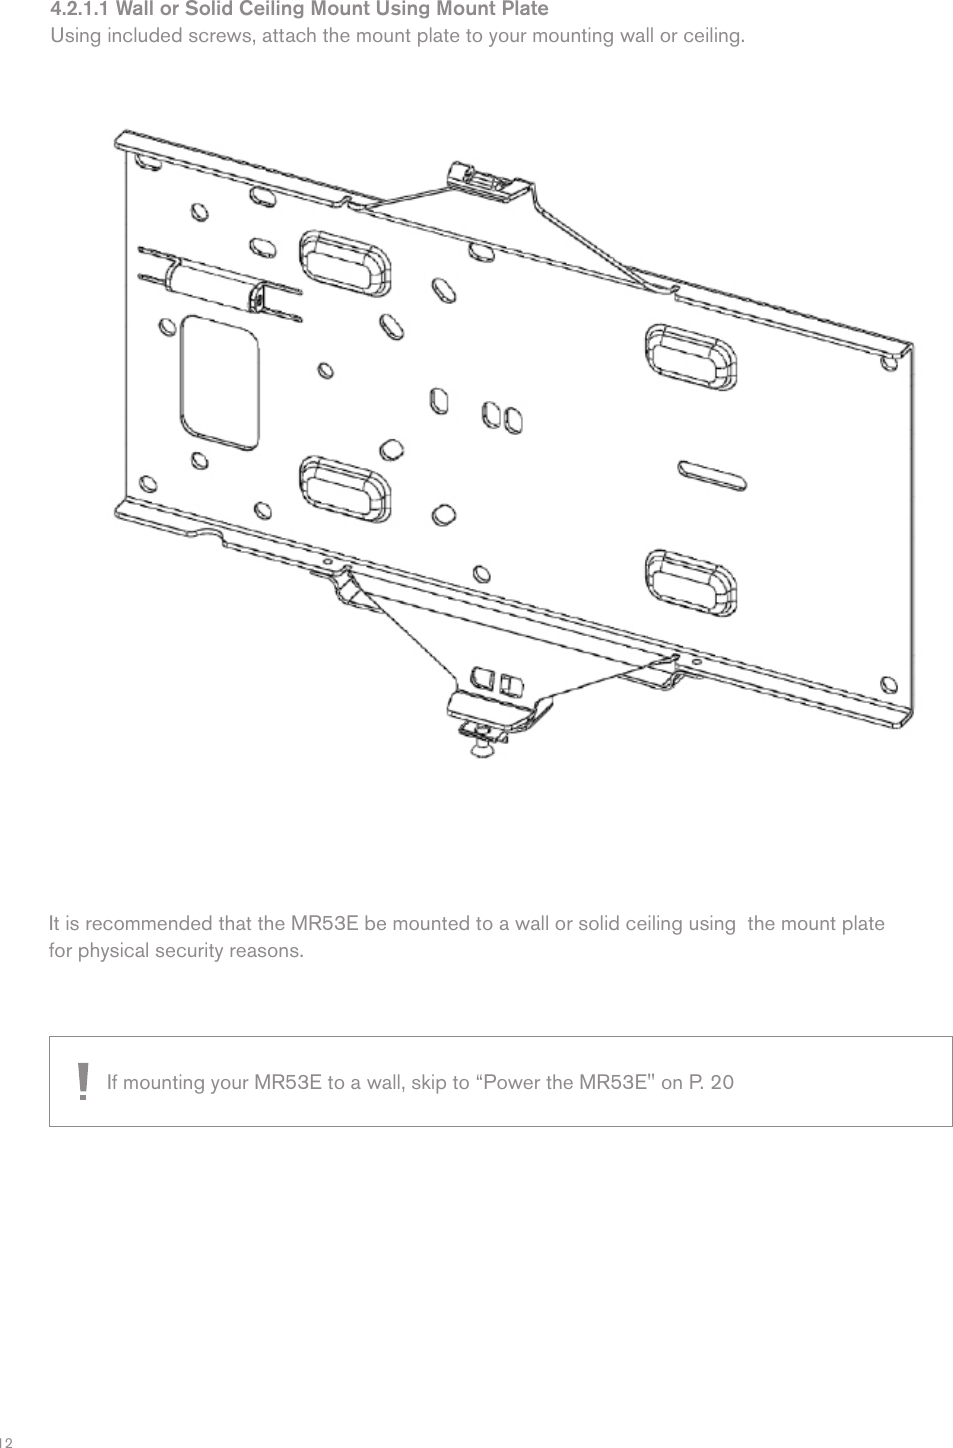 124.2.1.1 Wall or Solid Ceiling Mount Using Mount PlateUsing included screws, attach the mount plate to your mounting wall or ceiling.It is recommended that the MR53E be mounted to a wall or solid ceiling using  the mount plate for physical security reasons.If mounting your MR53E to a wall, skip to “Power the MR53E&quot; on P. 20